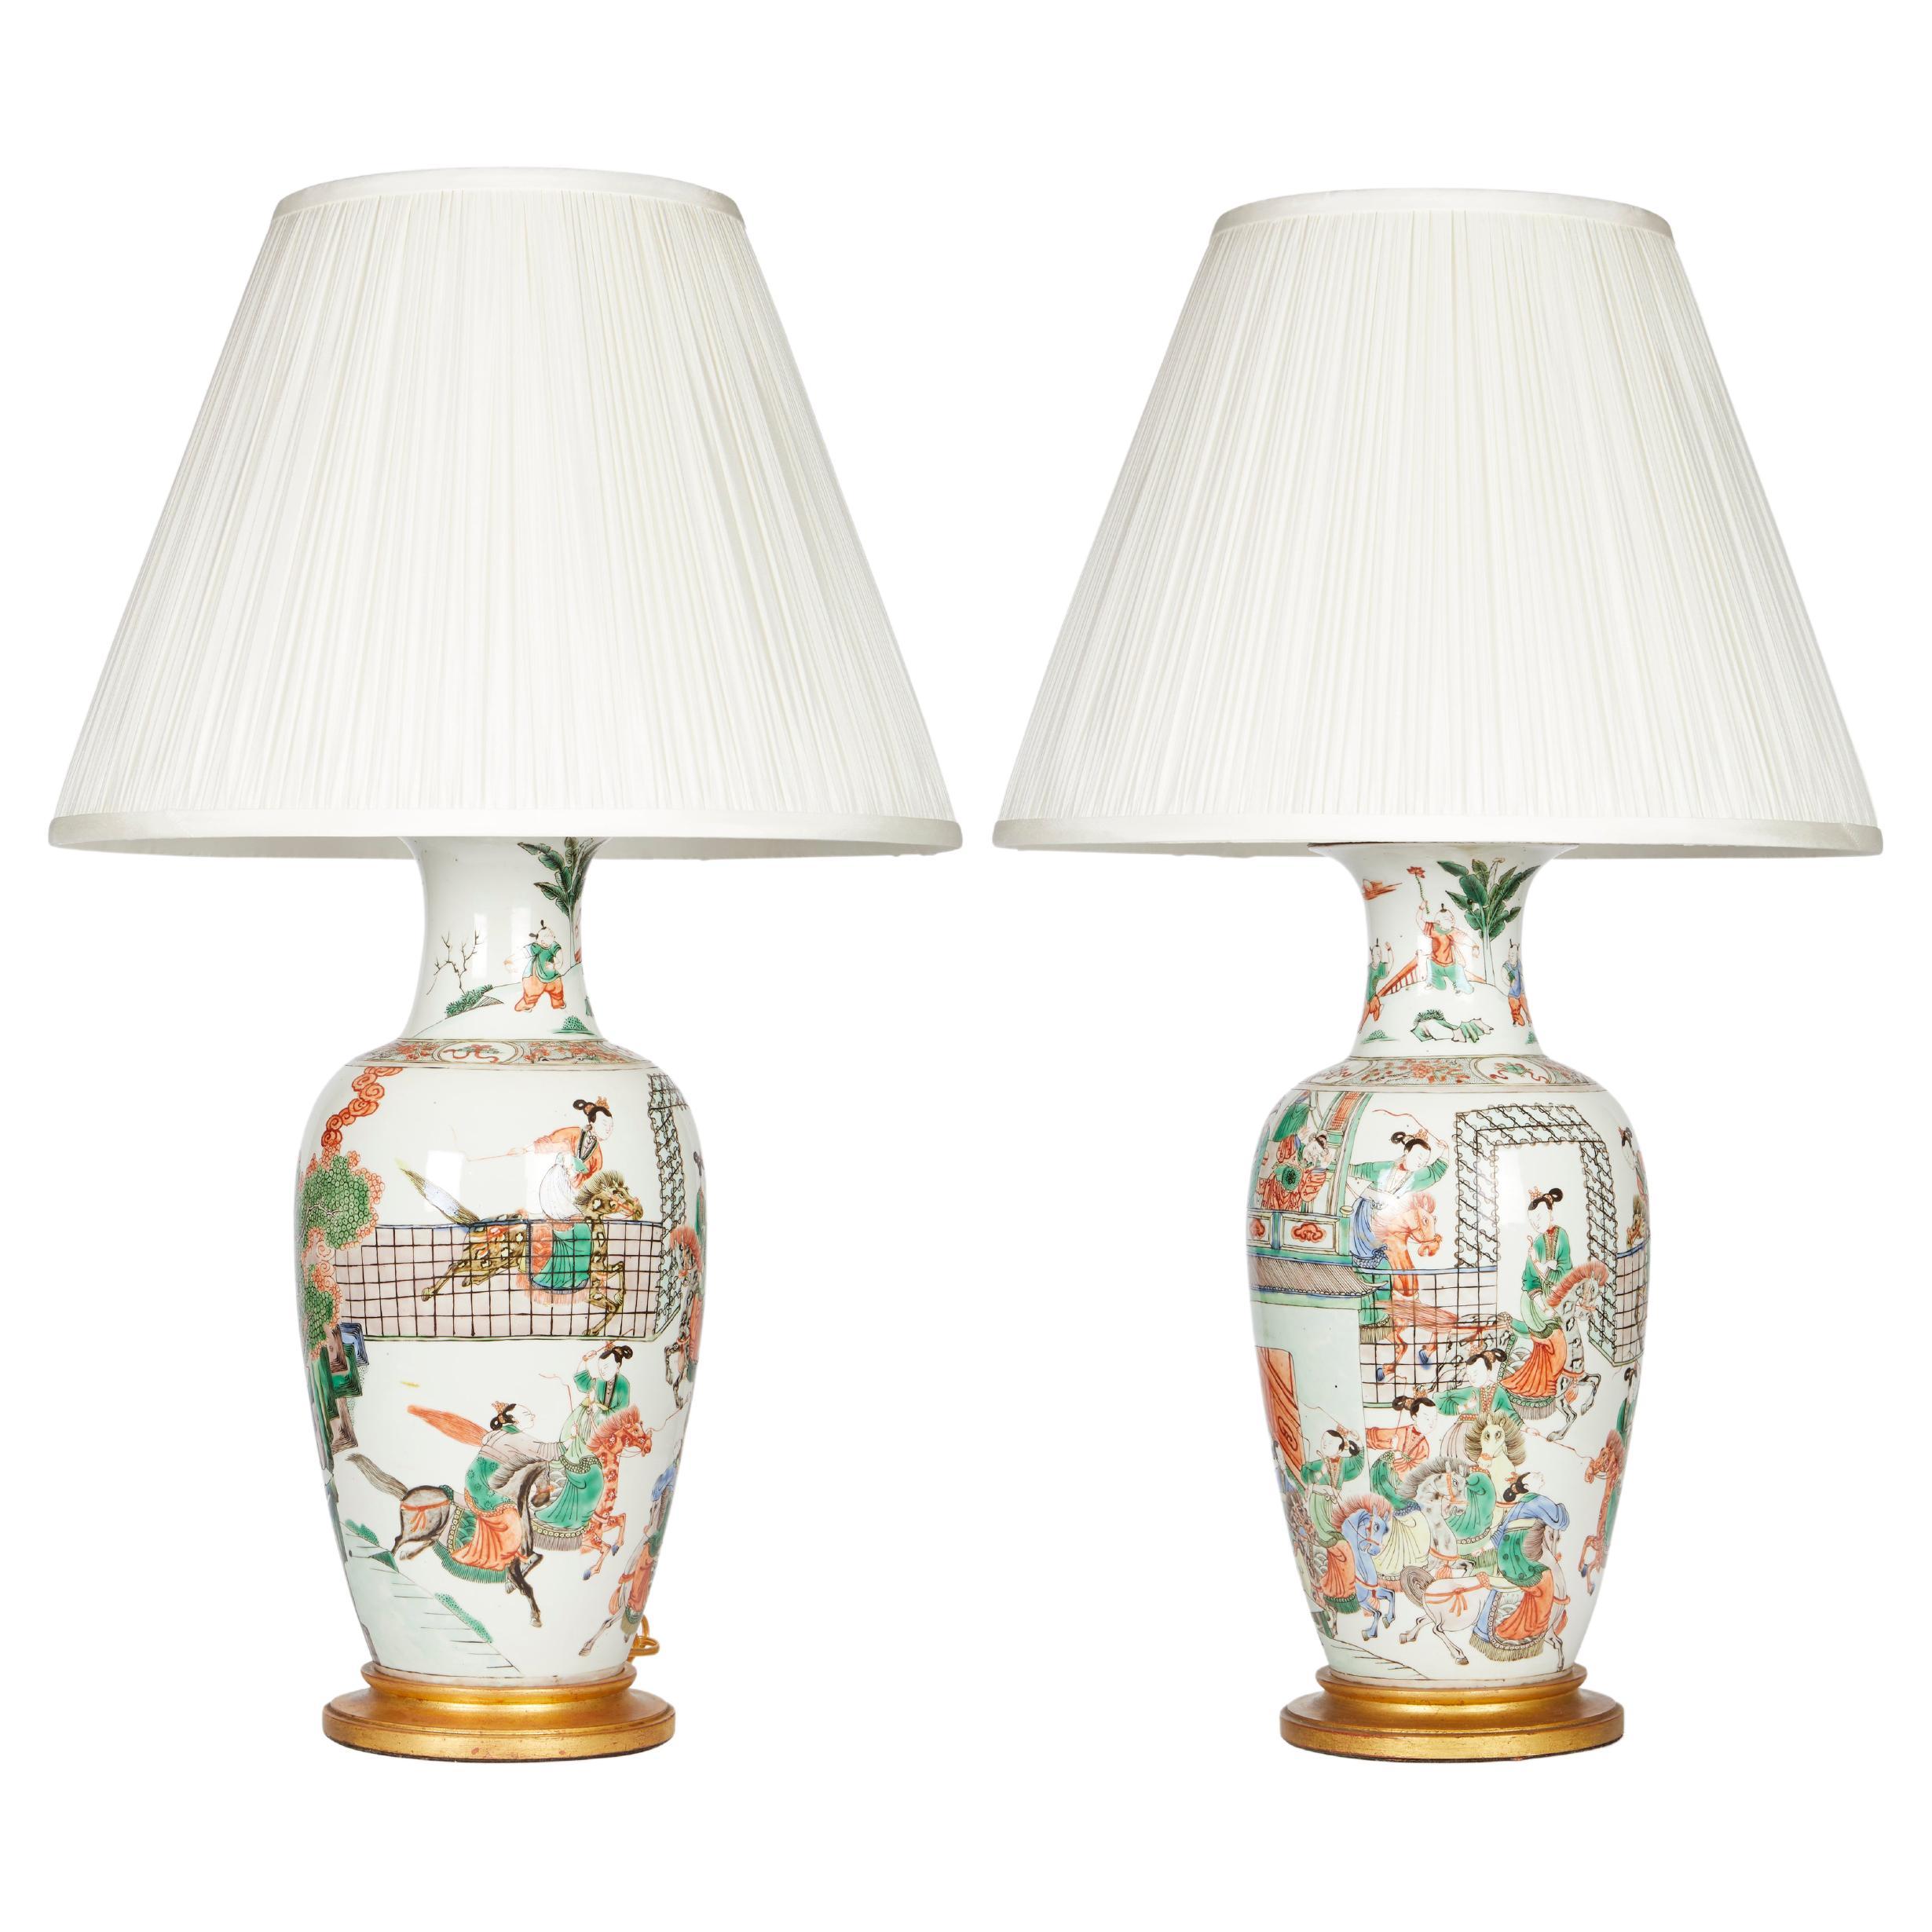 Pair of Chinese Polychrome Porcelain Lamp